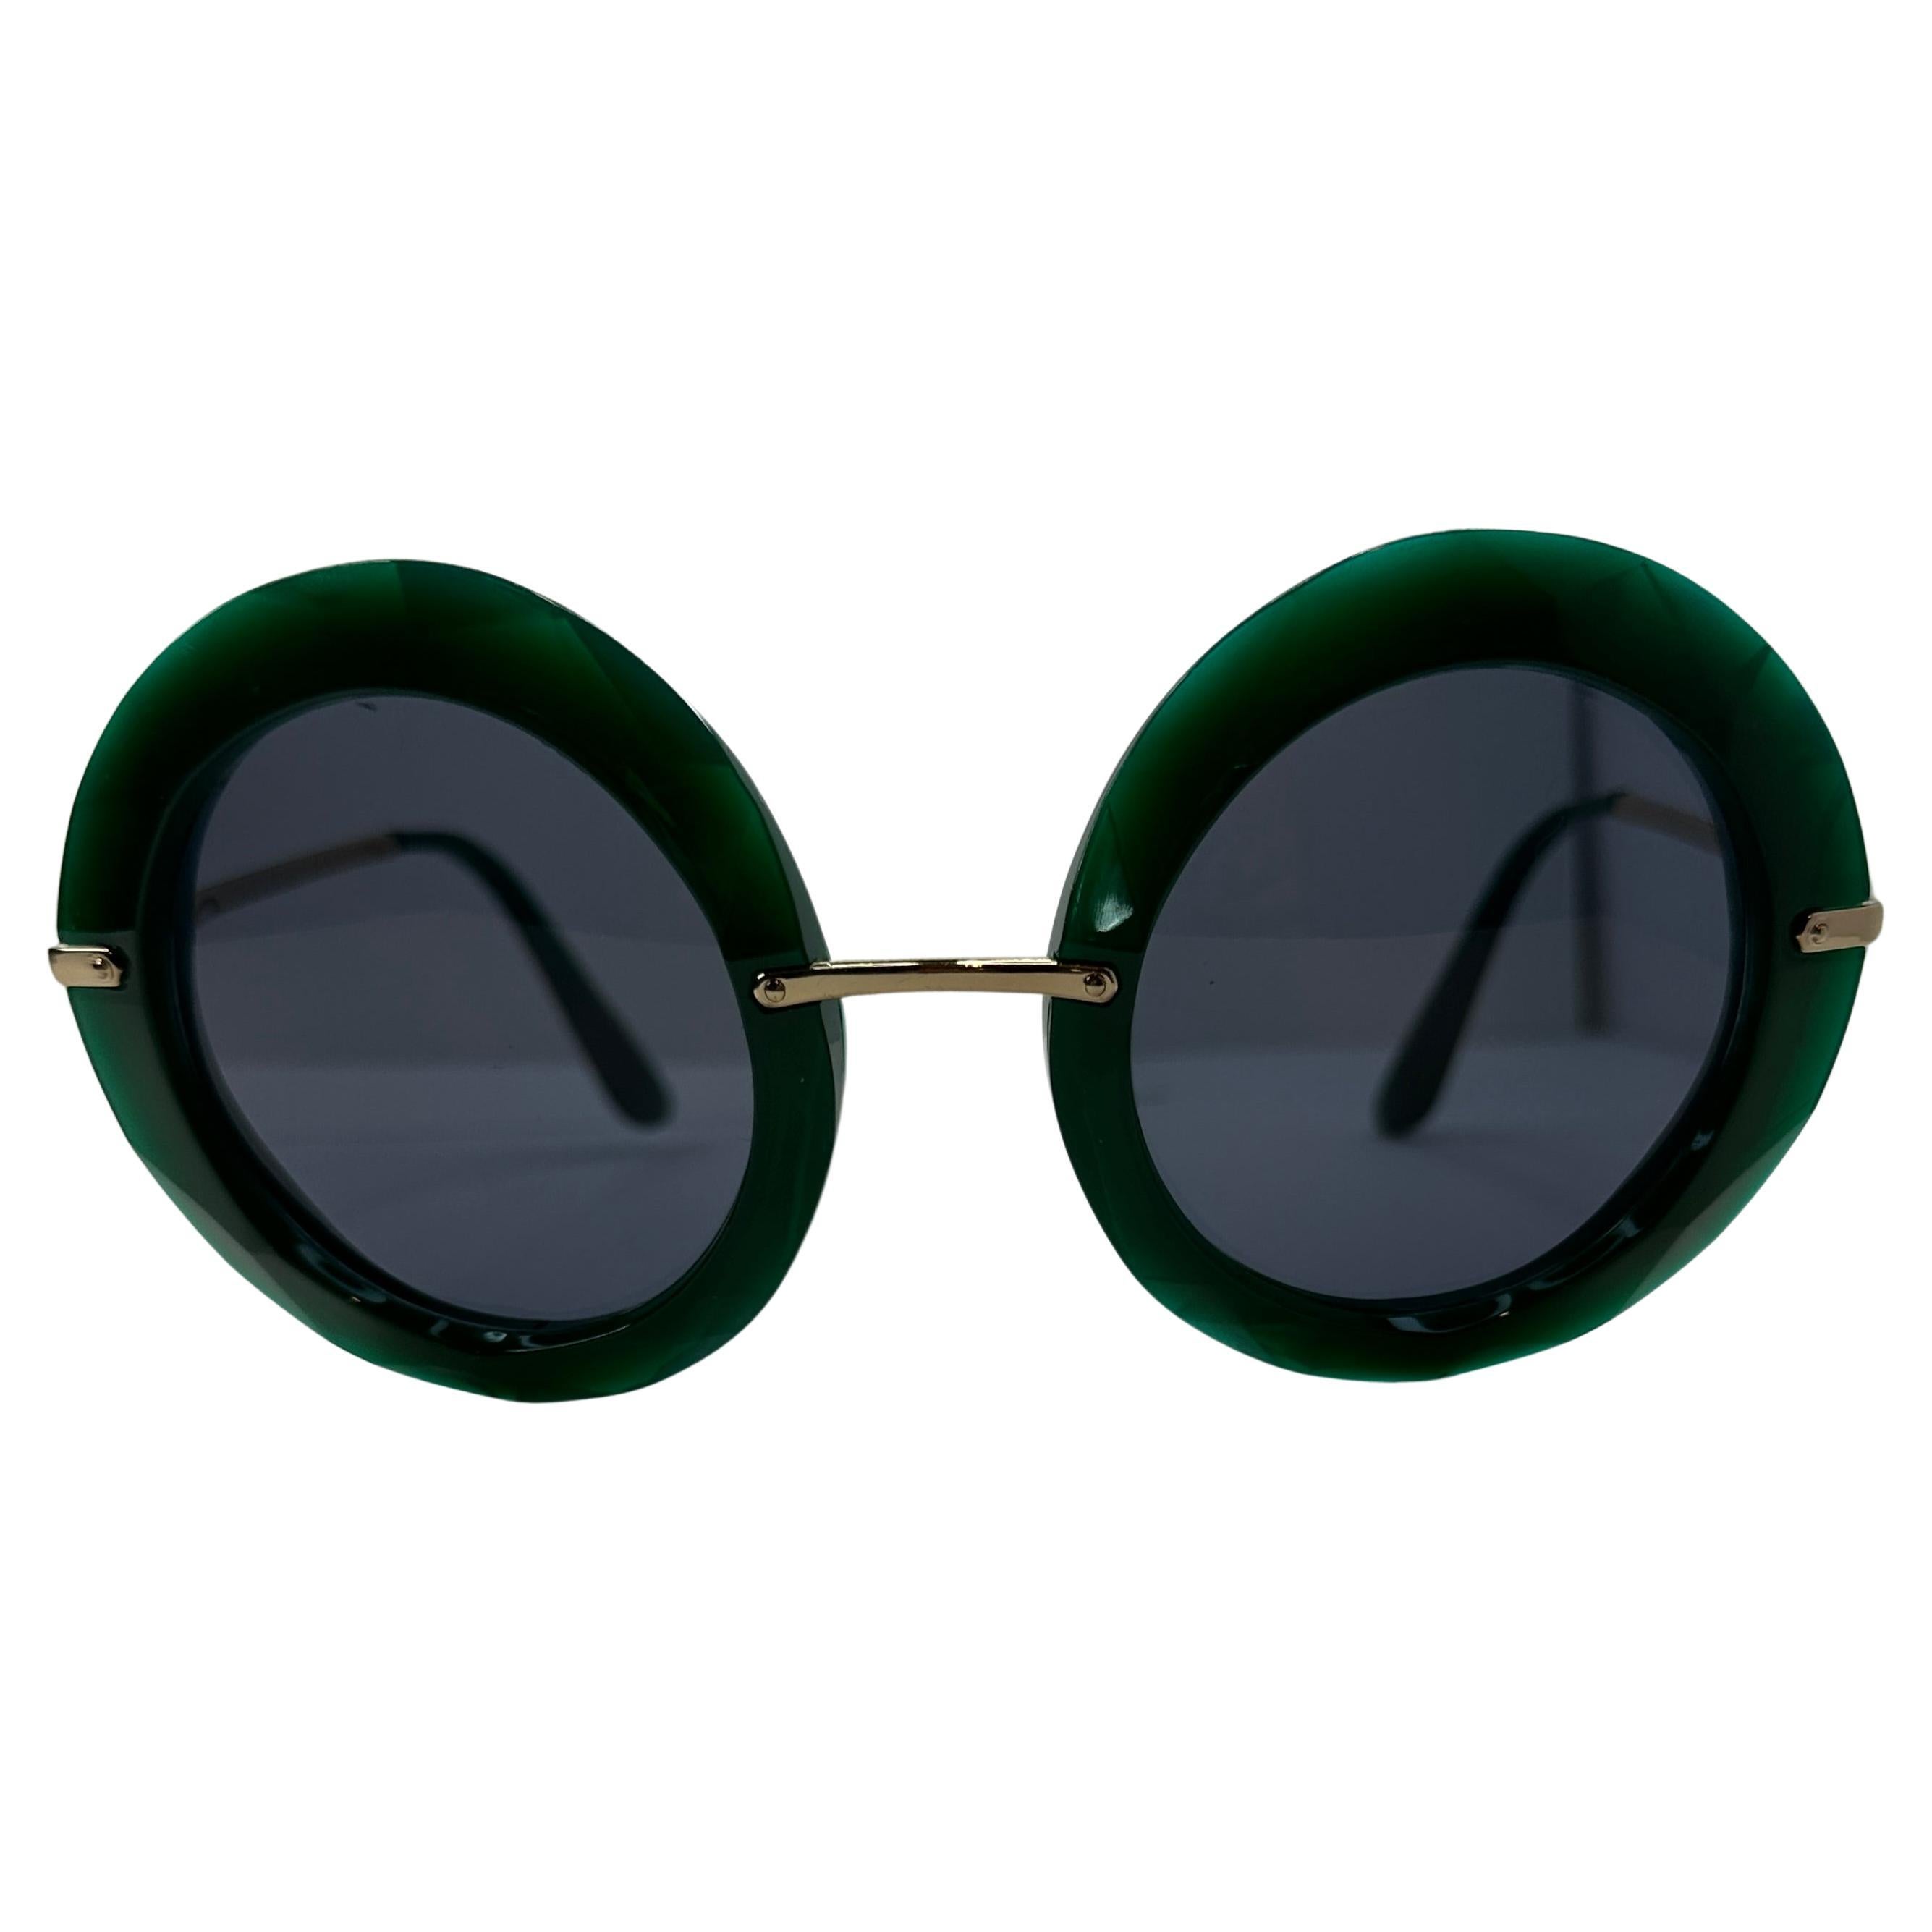 Dolce & Gabbana "Limited Edition" Emerald-Green Multi-Facet Frame Sunglasses For Sale